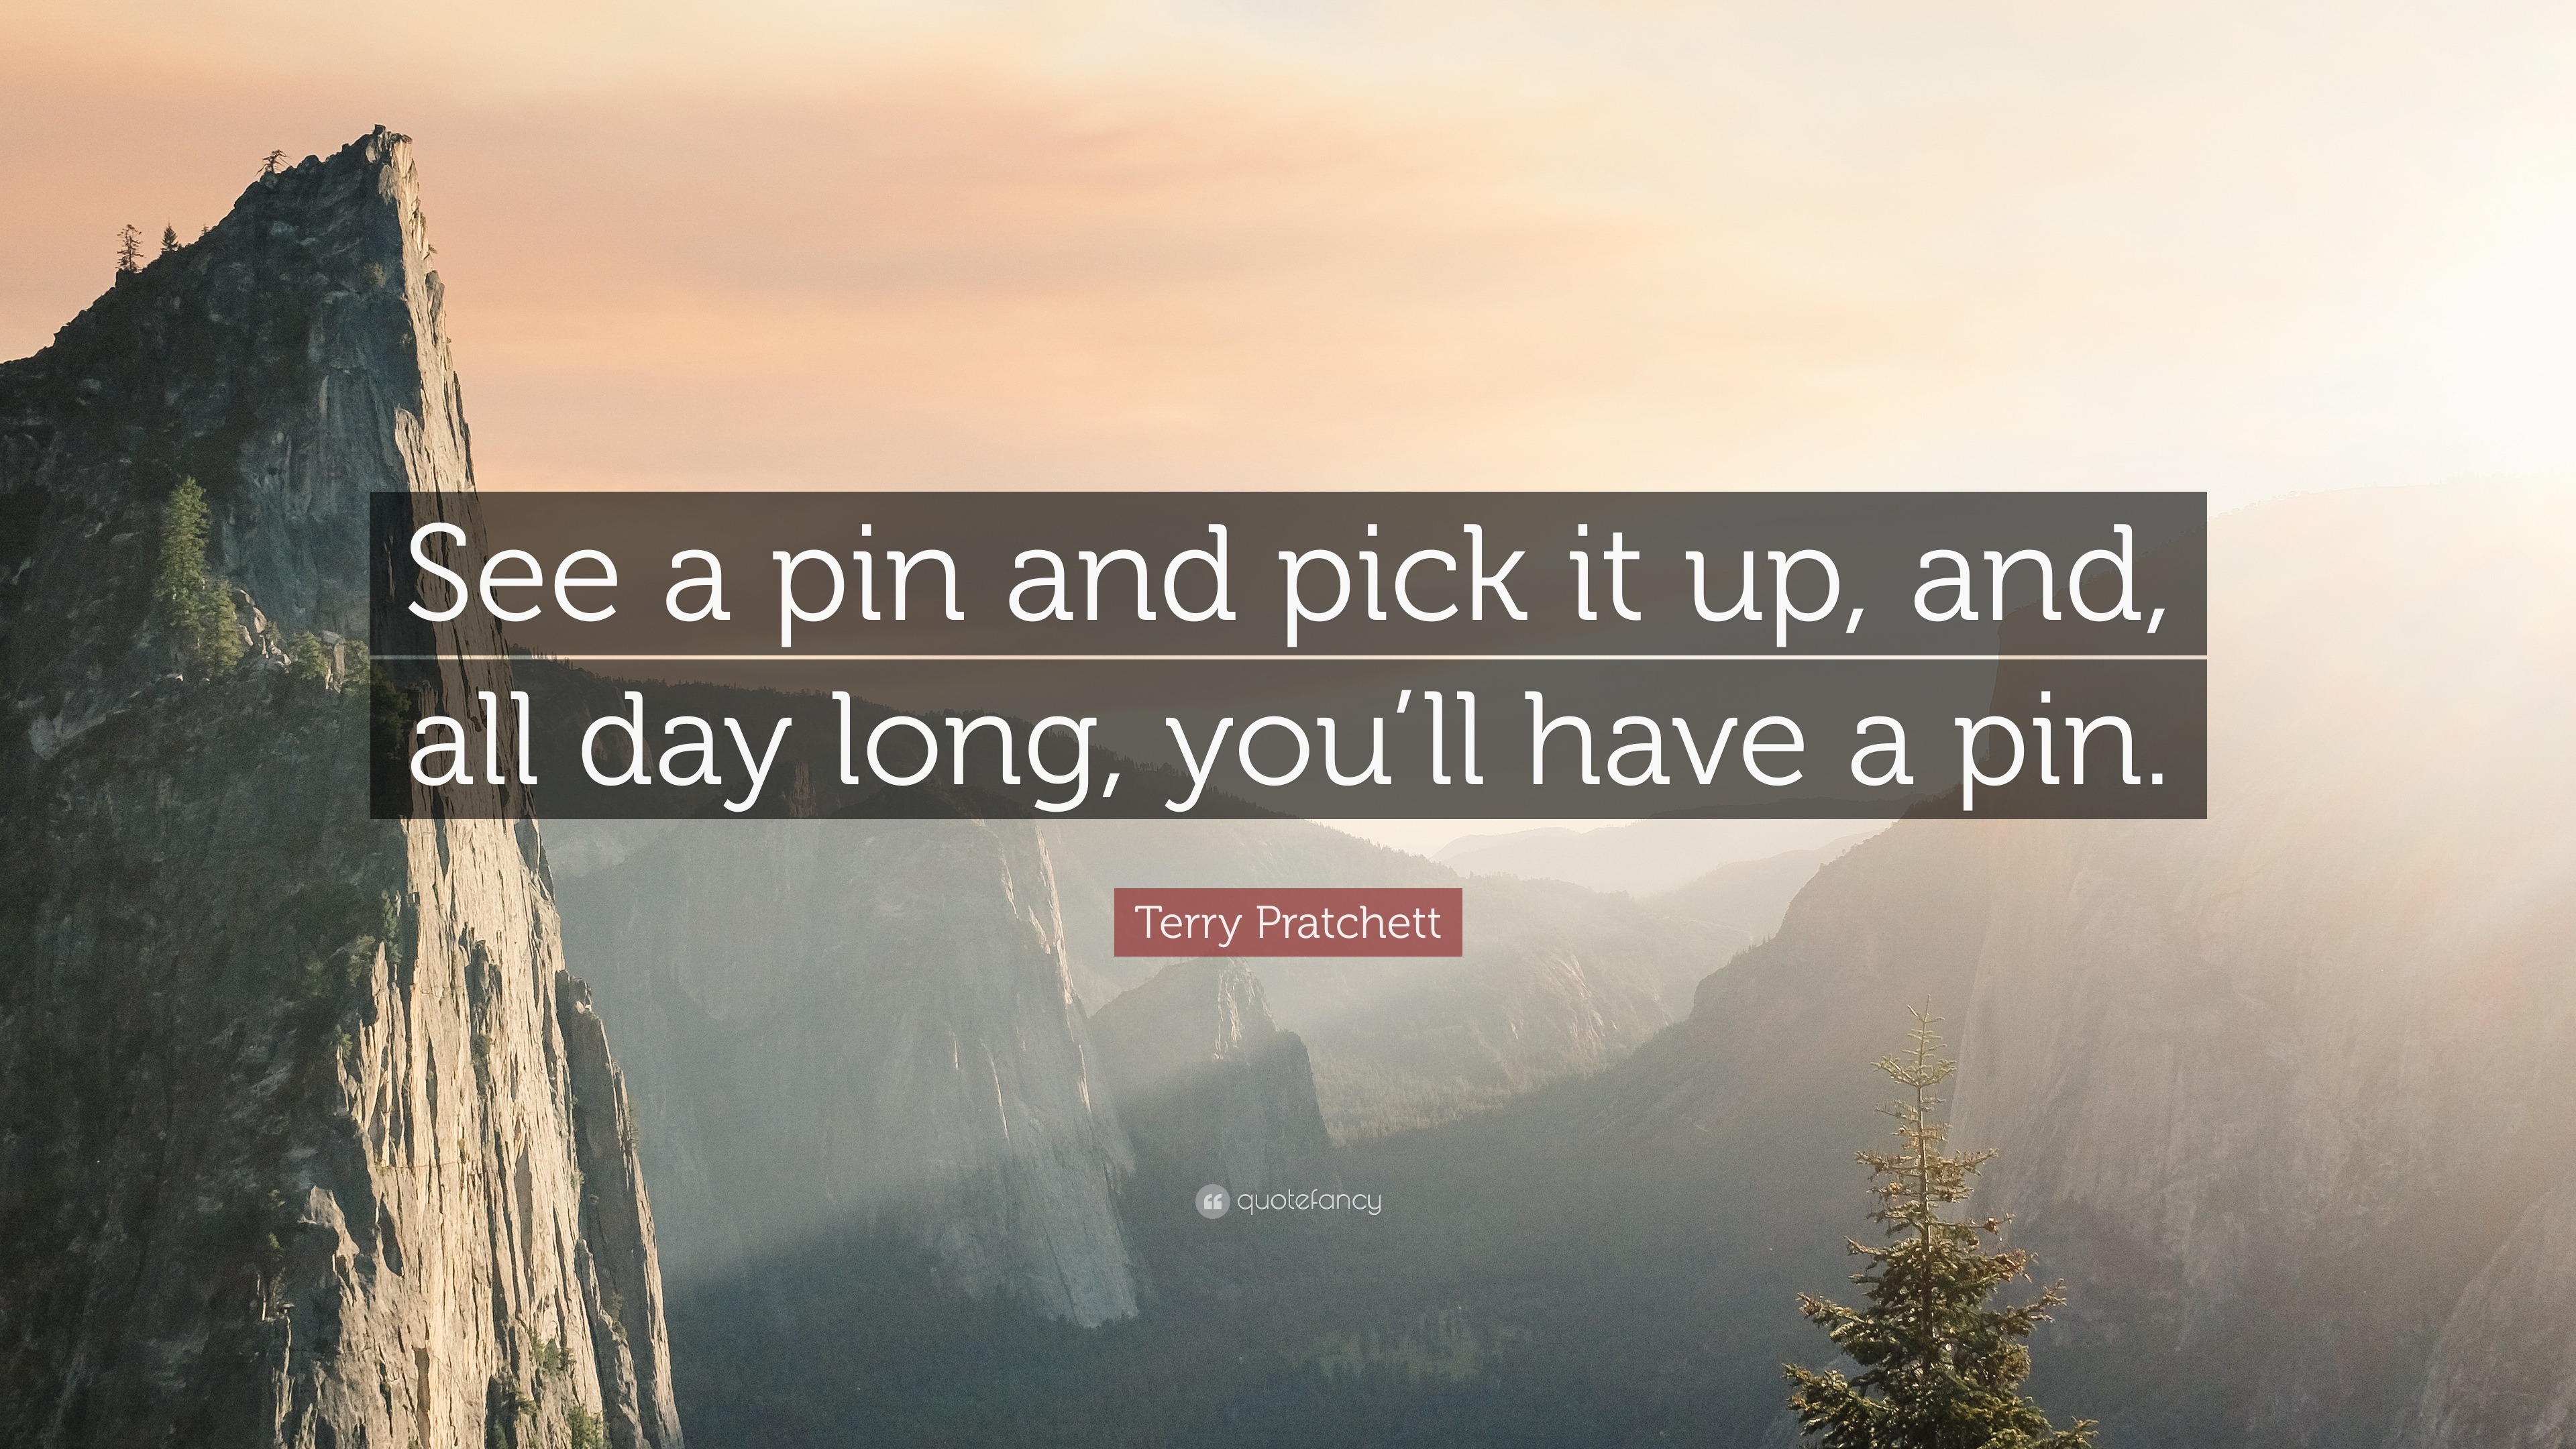 https://quotefancy.com/media/wallpaper/3840x2160/195081-Terry-Pratchett-Quote-See-a-pin-and-pick-it-up-and-all-day-long.jpg